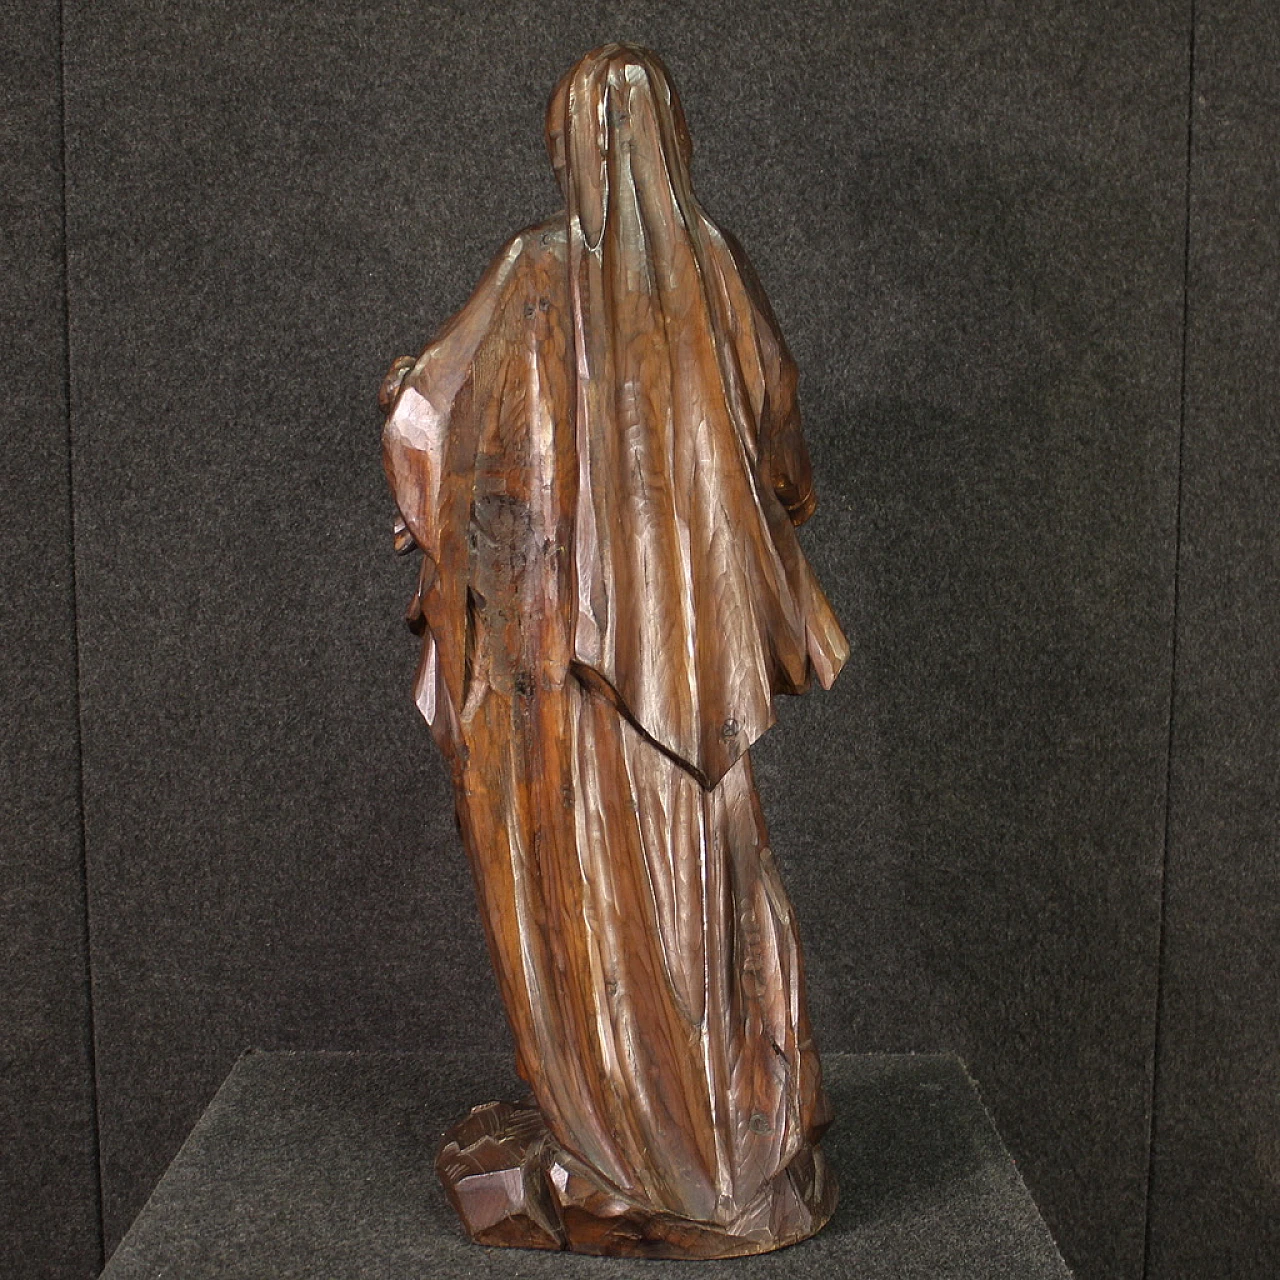 Madonna, mahogany-stained pear wood sculpture, mid-19th century 7